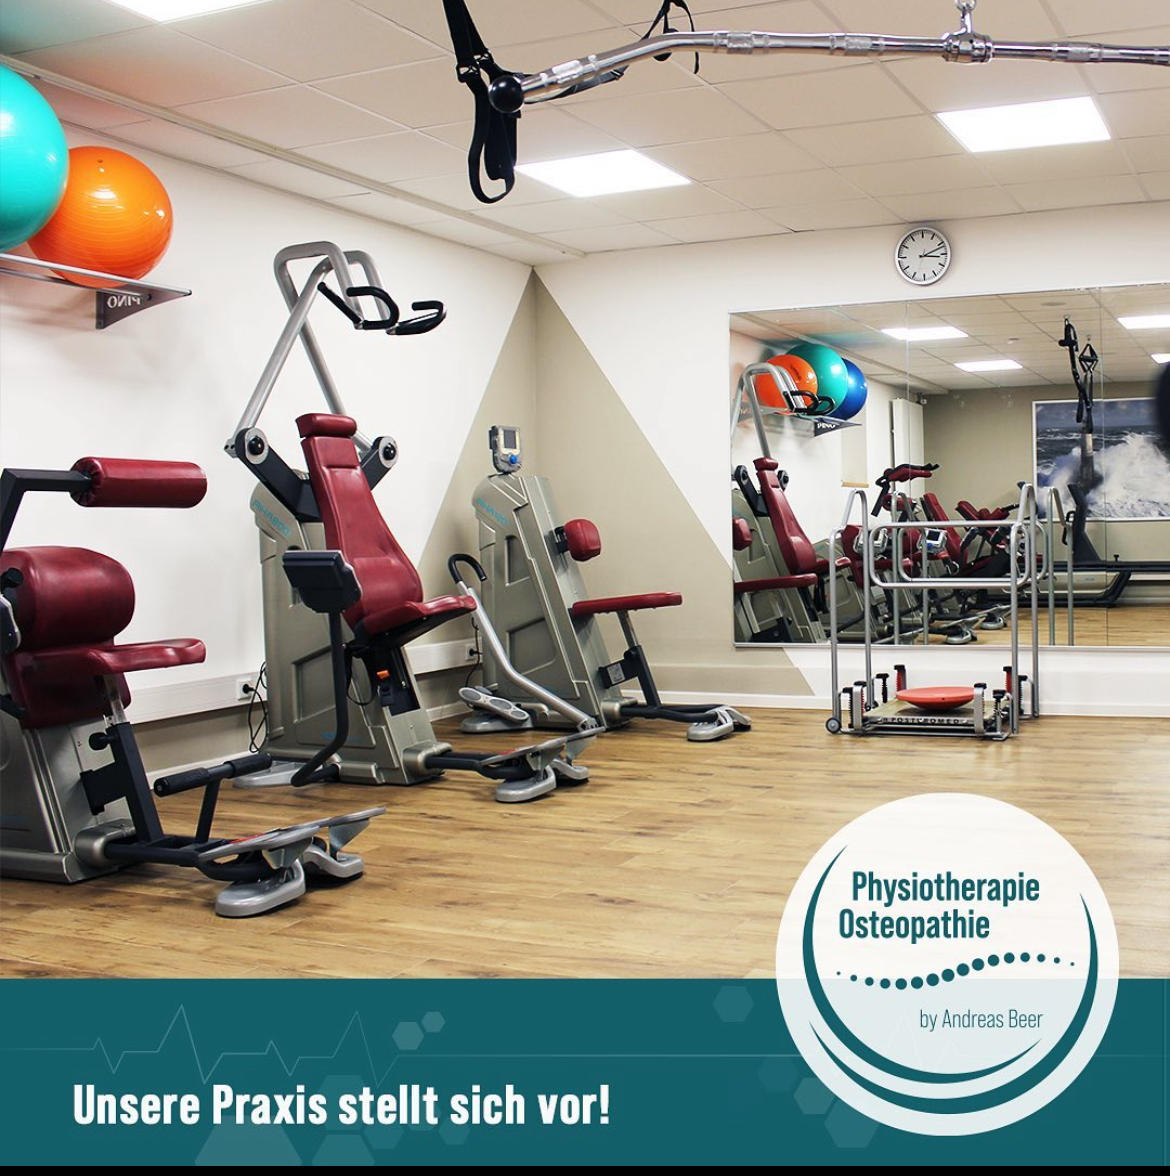 Bilder Physiotherapie & Osteopathie by Andreas Beer